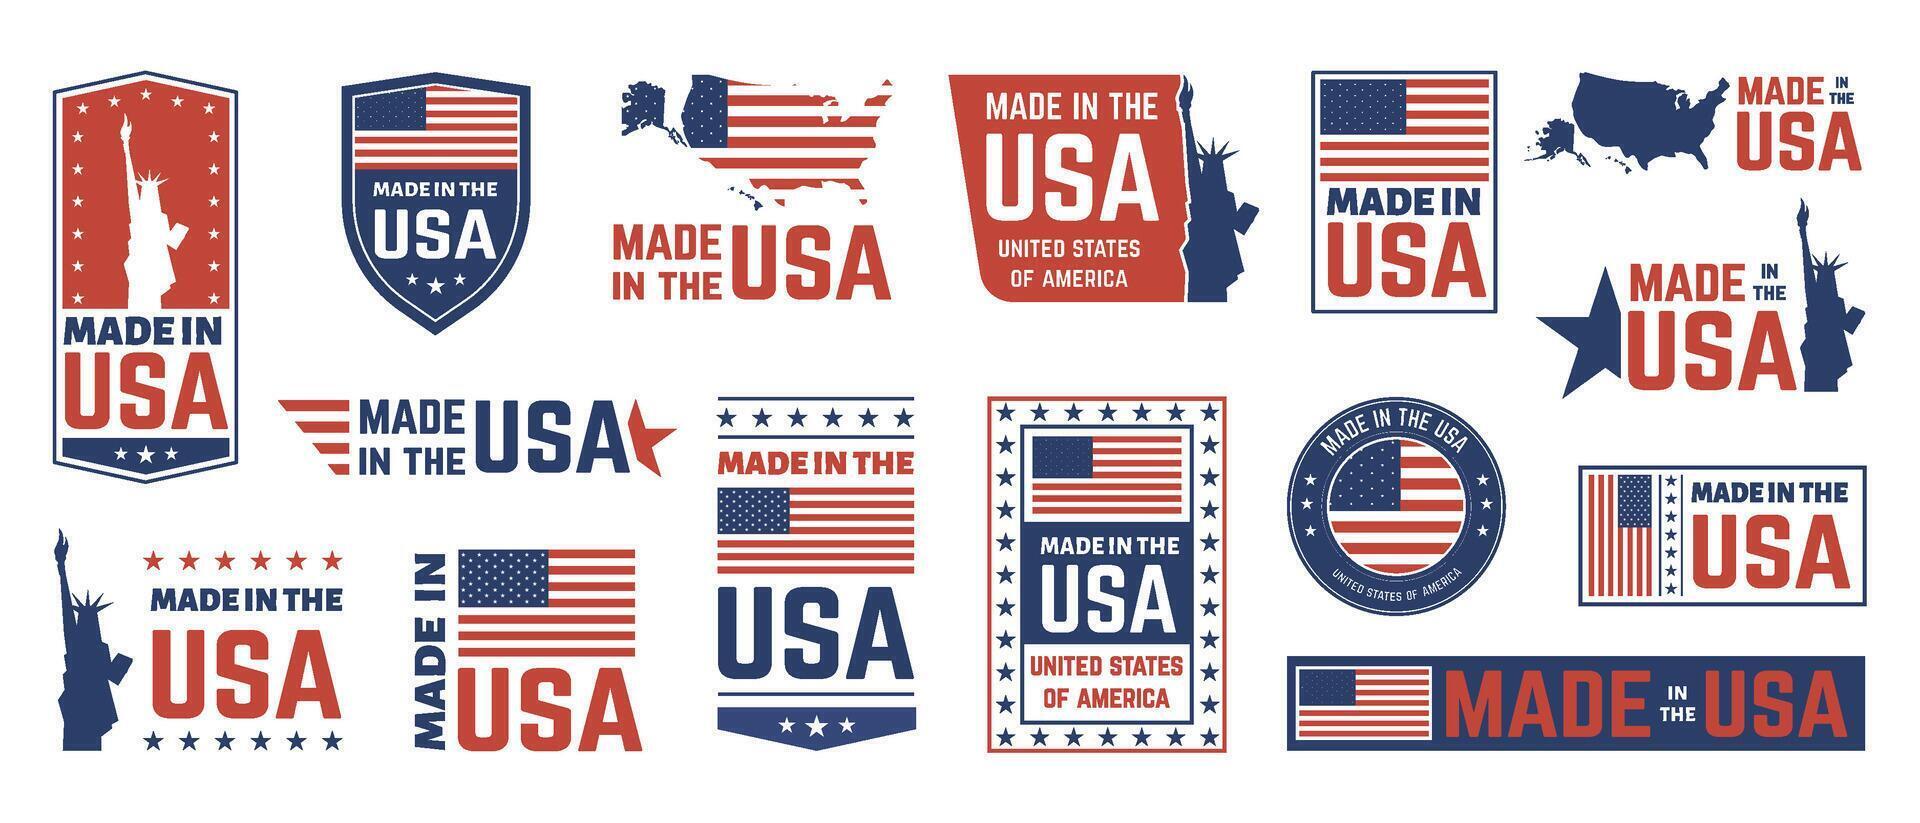 Made in USA label. American flag emblem, patriot proud nation labels icon and united states label stamps vector isolated symbols set